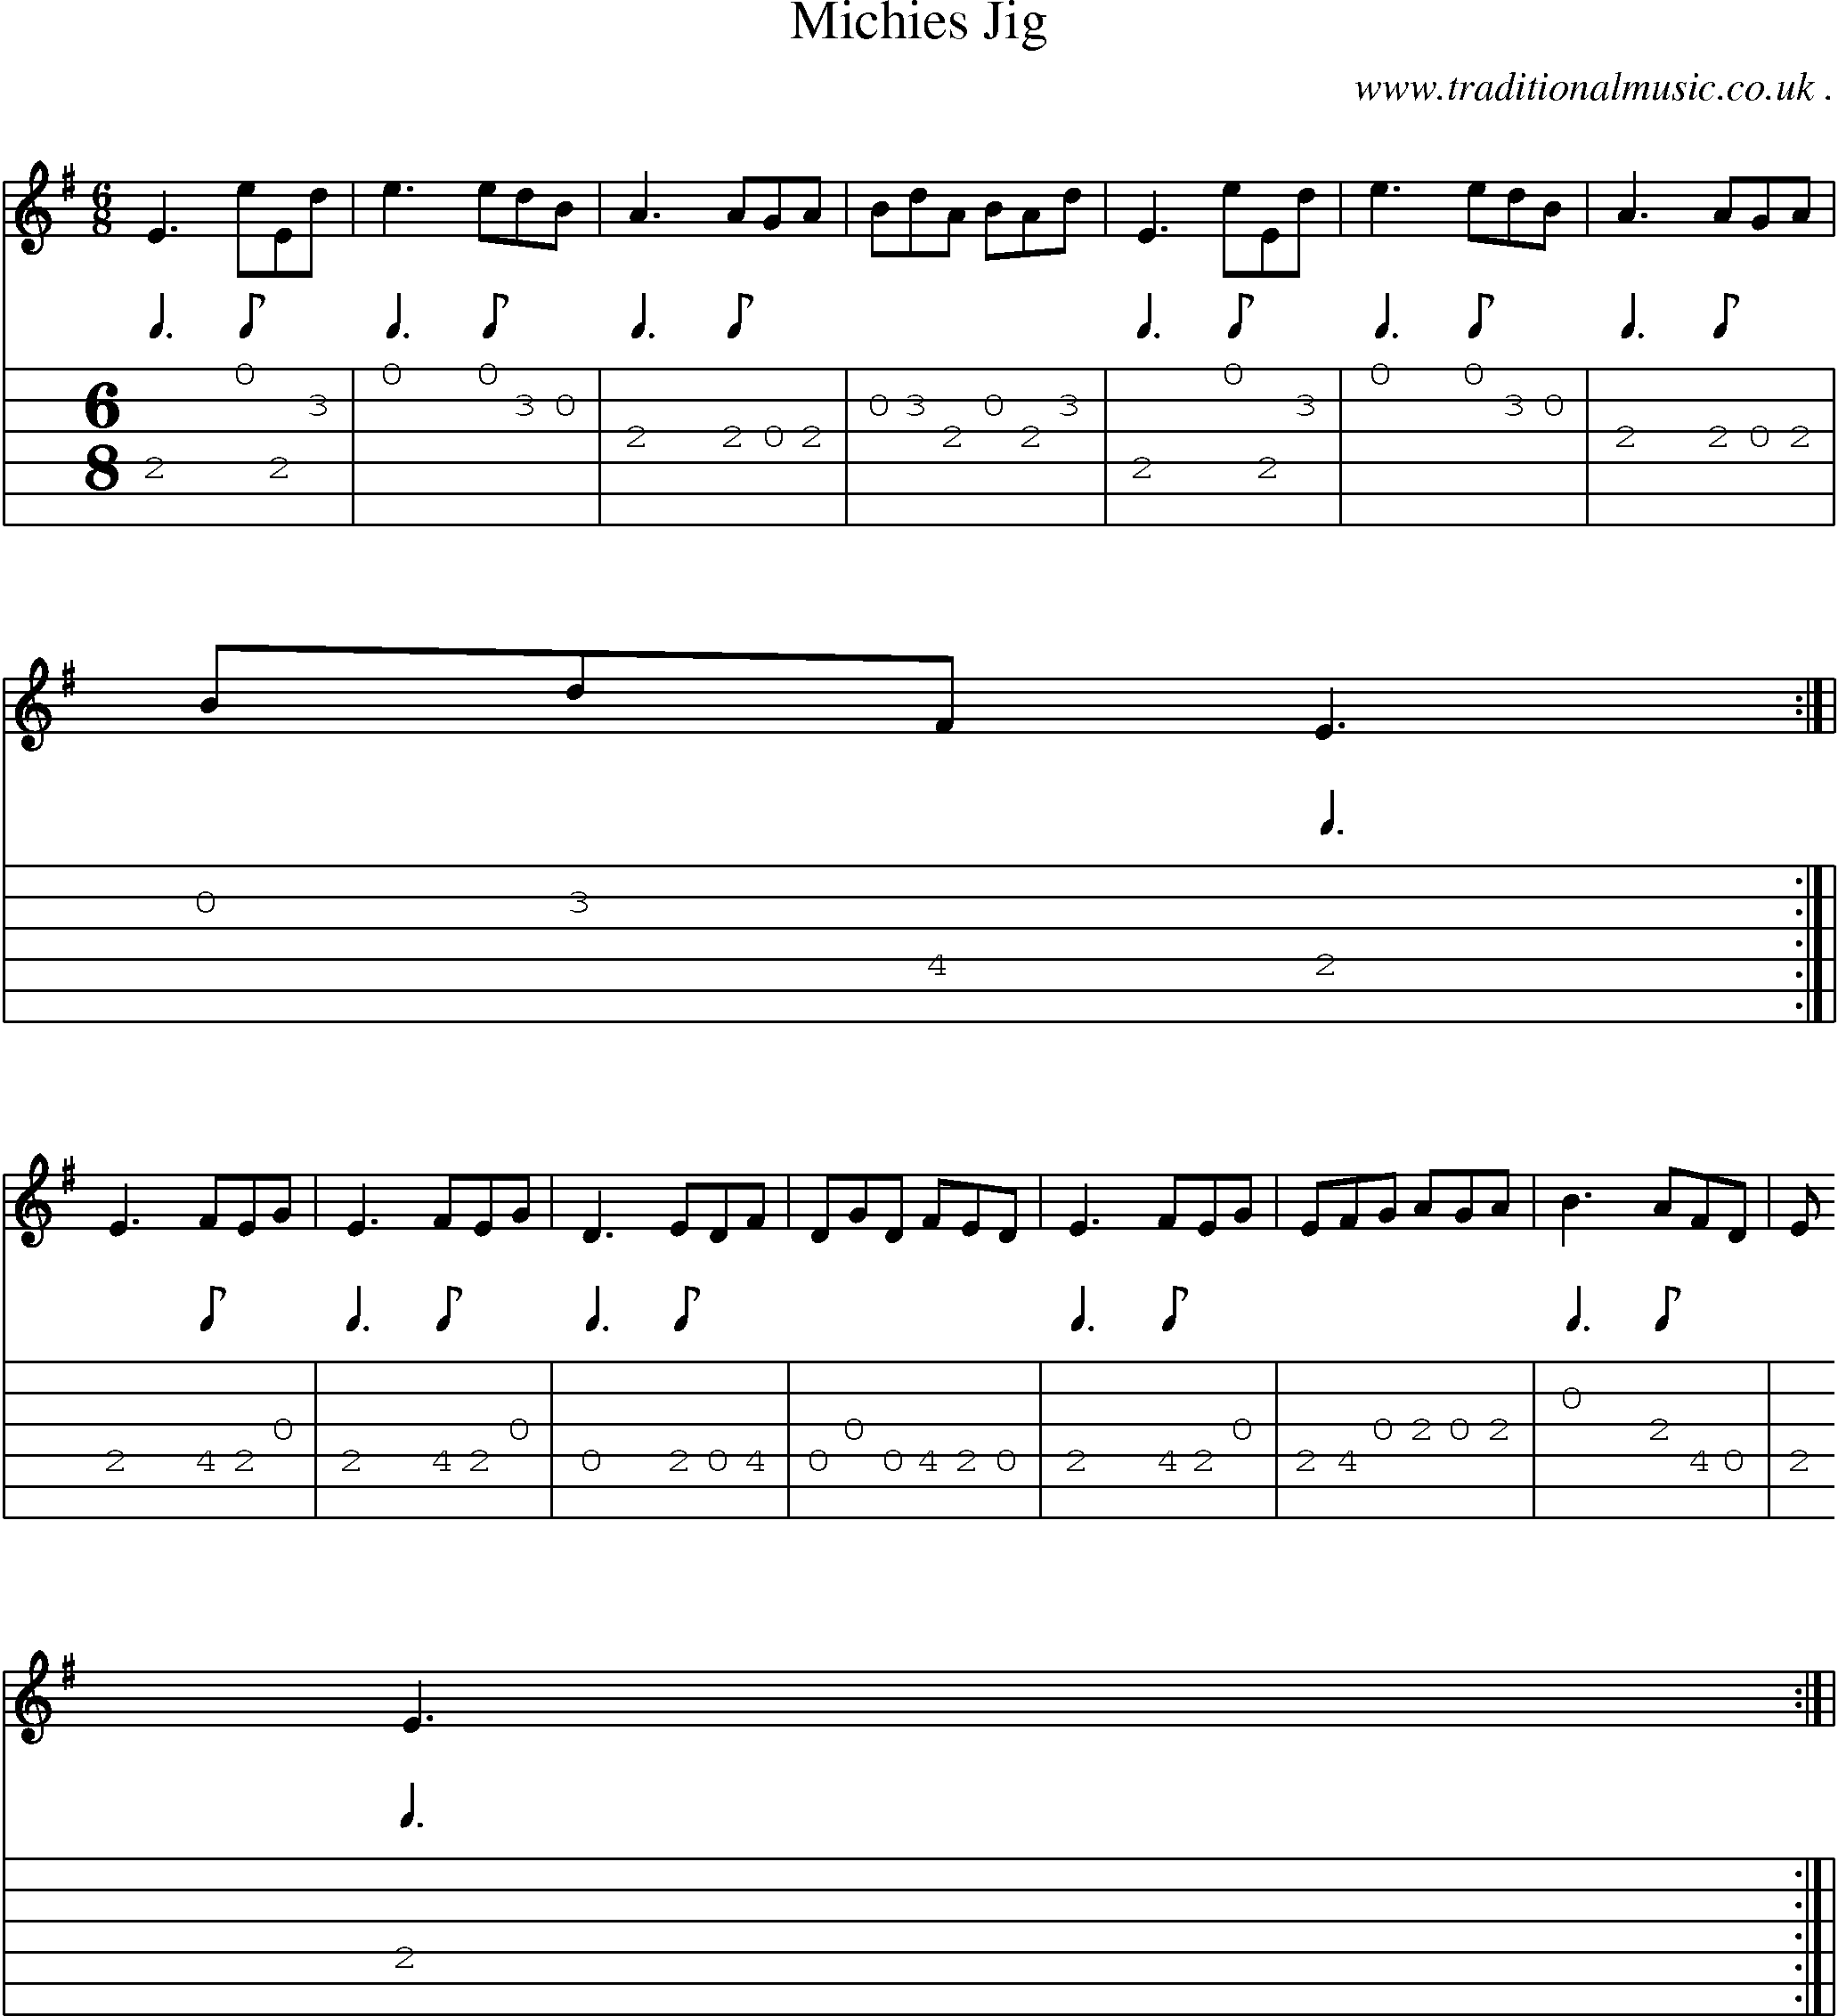 Sheet-Music and Guitar Tabs for Michies Jig